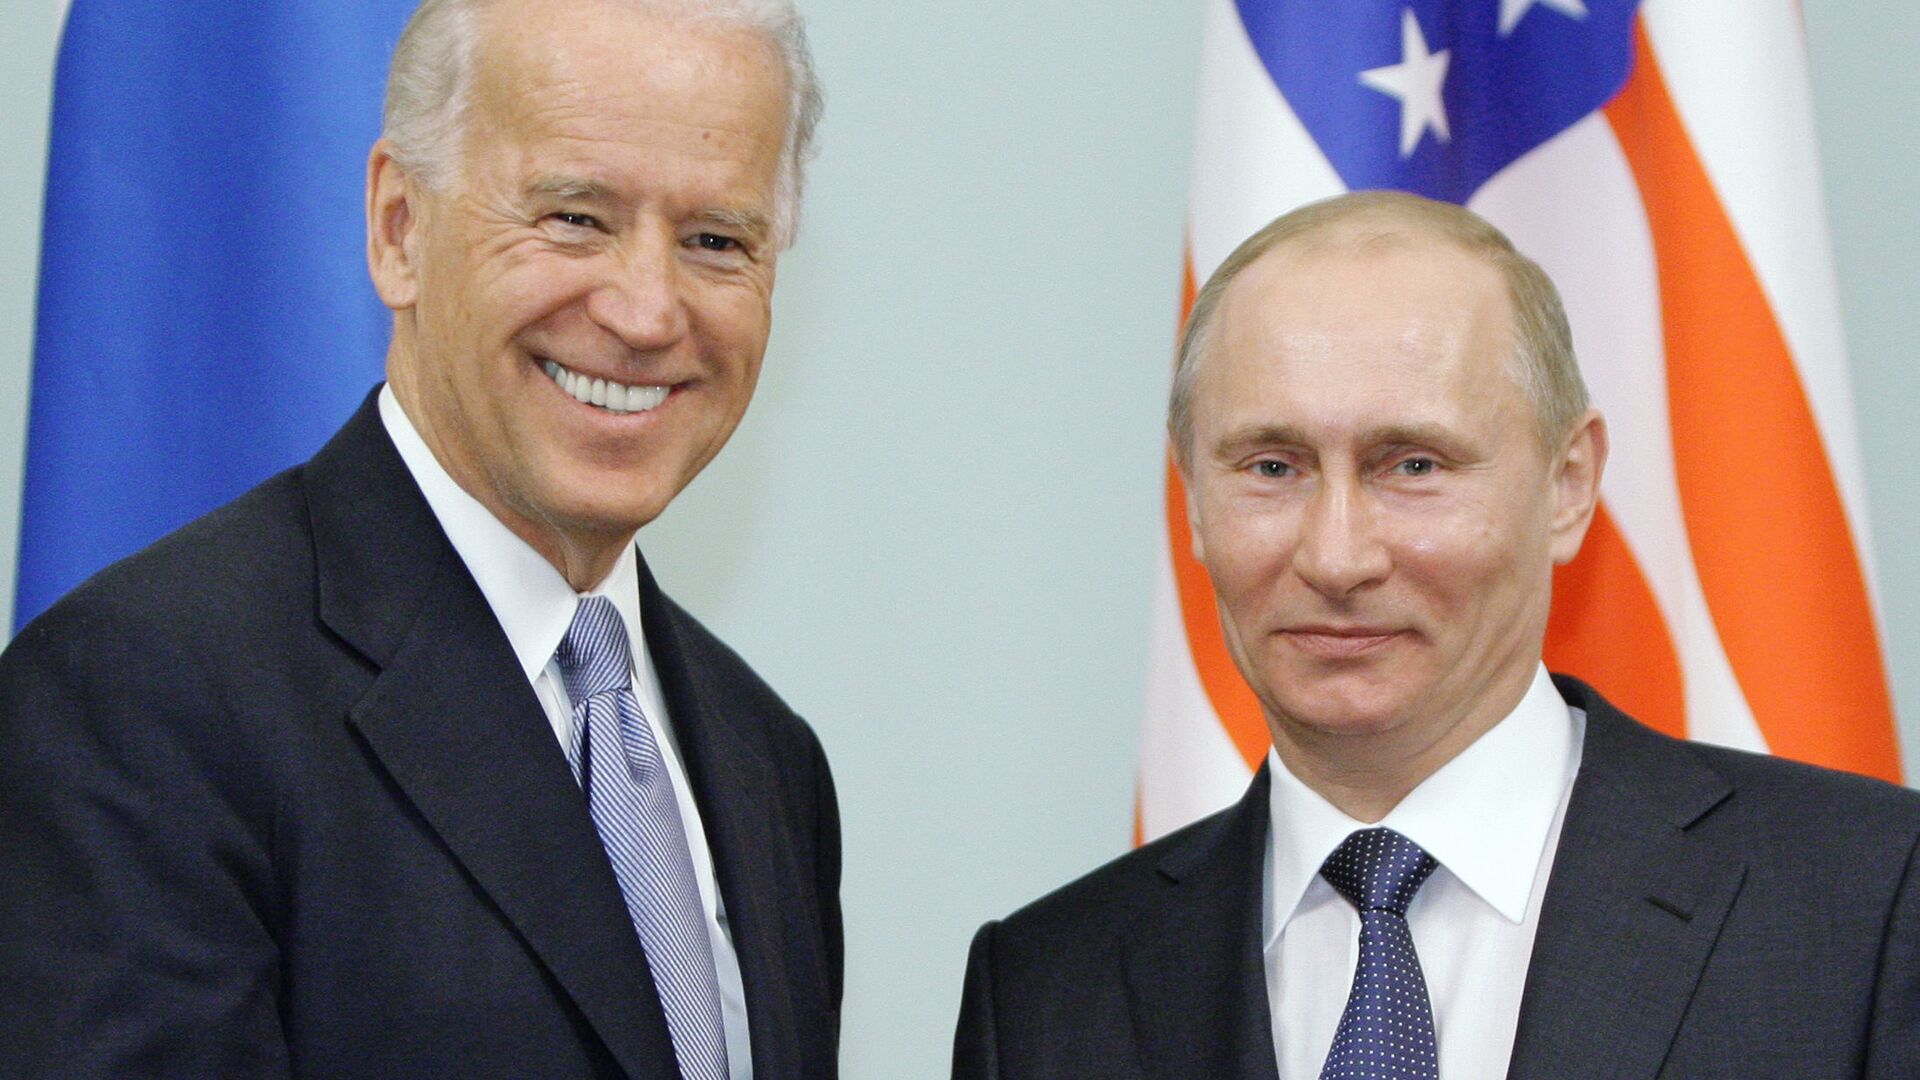 In this March 10, 2011 file photo, then Vice President  Joe Biden, left, shakes hands with Russian Prime Minister Vladimir Putin in Moscow, Russia. - Sputnik International, 1920, 07.06.2021